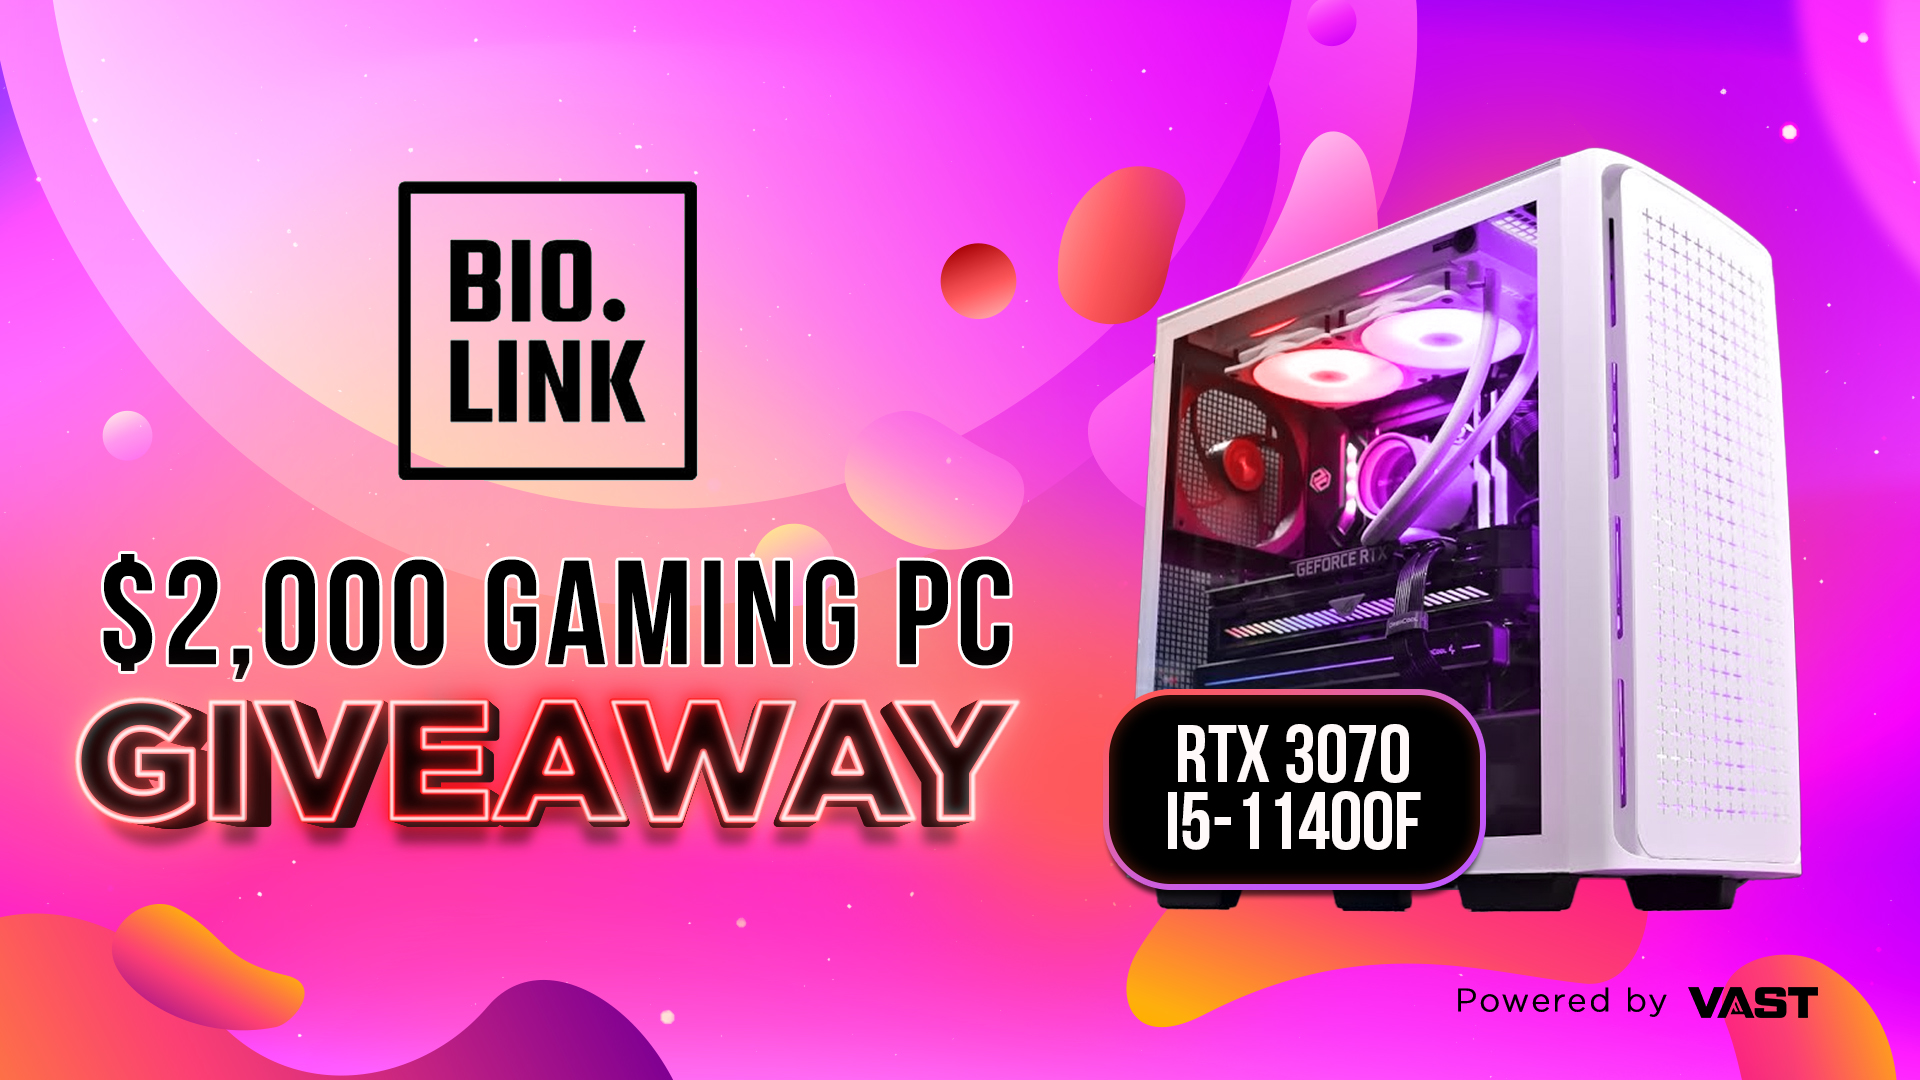 Bio.link | $2,000 RTX 3070 Gaming PC Giveaway Vast | Expand Your Reach